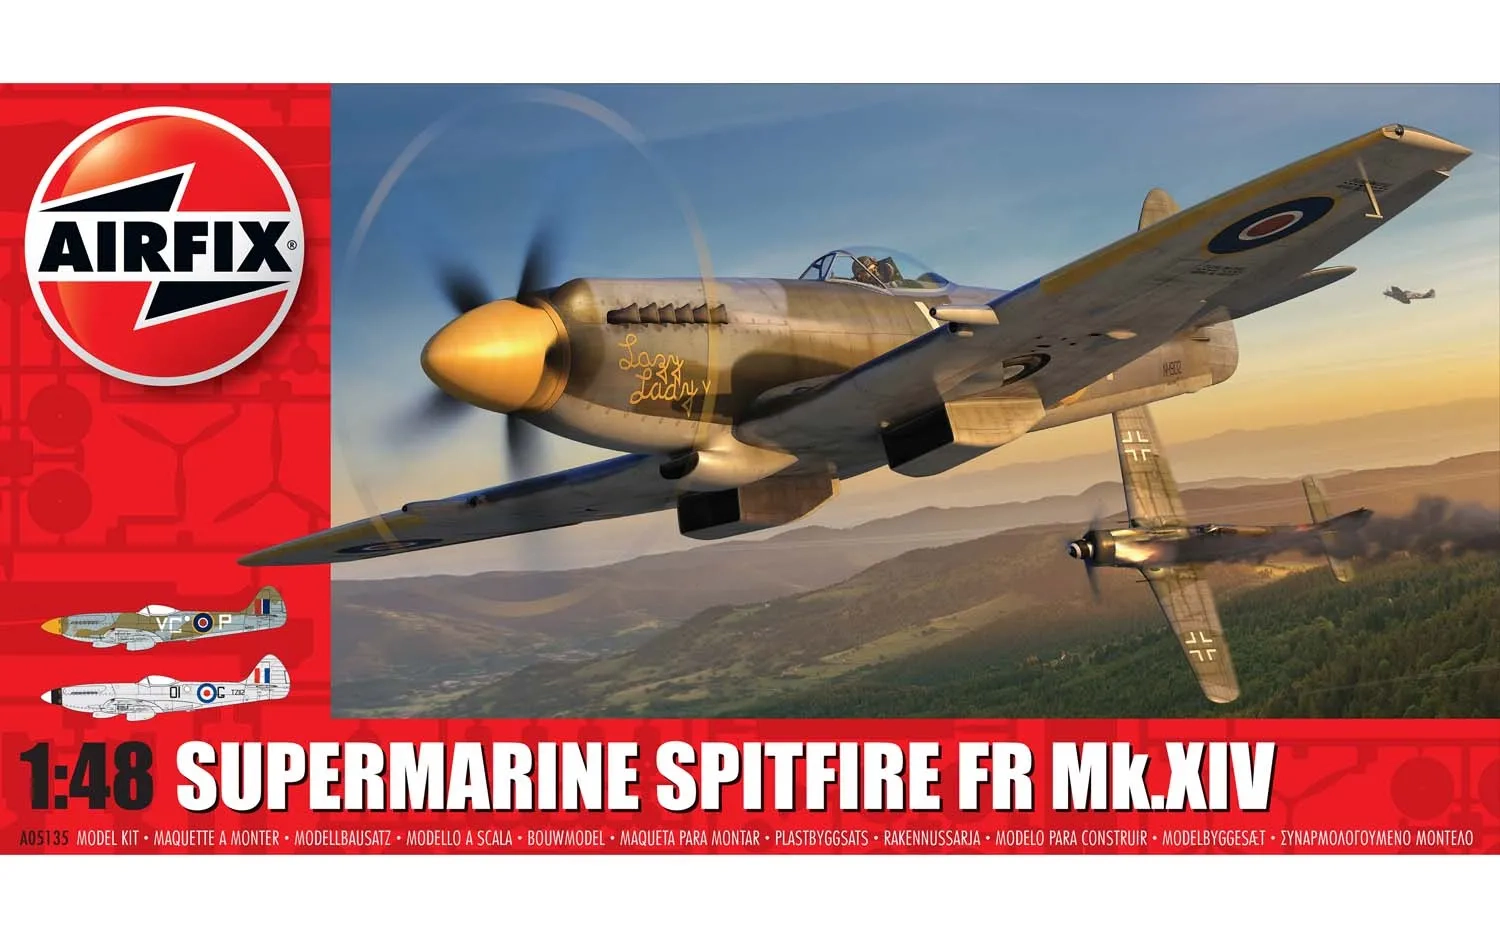 The 1:48 Spitfire Collection